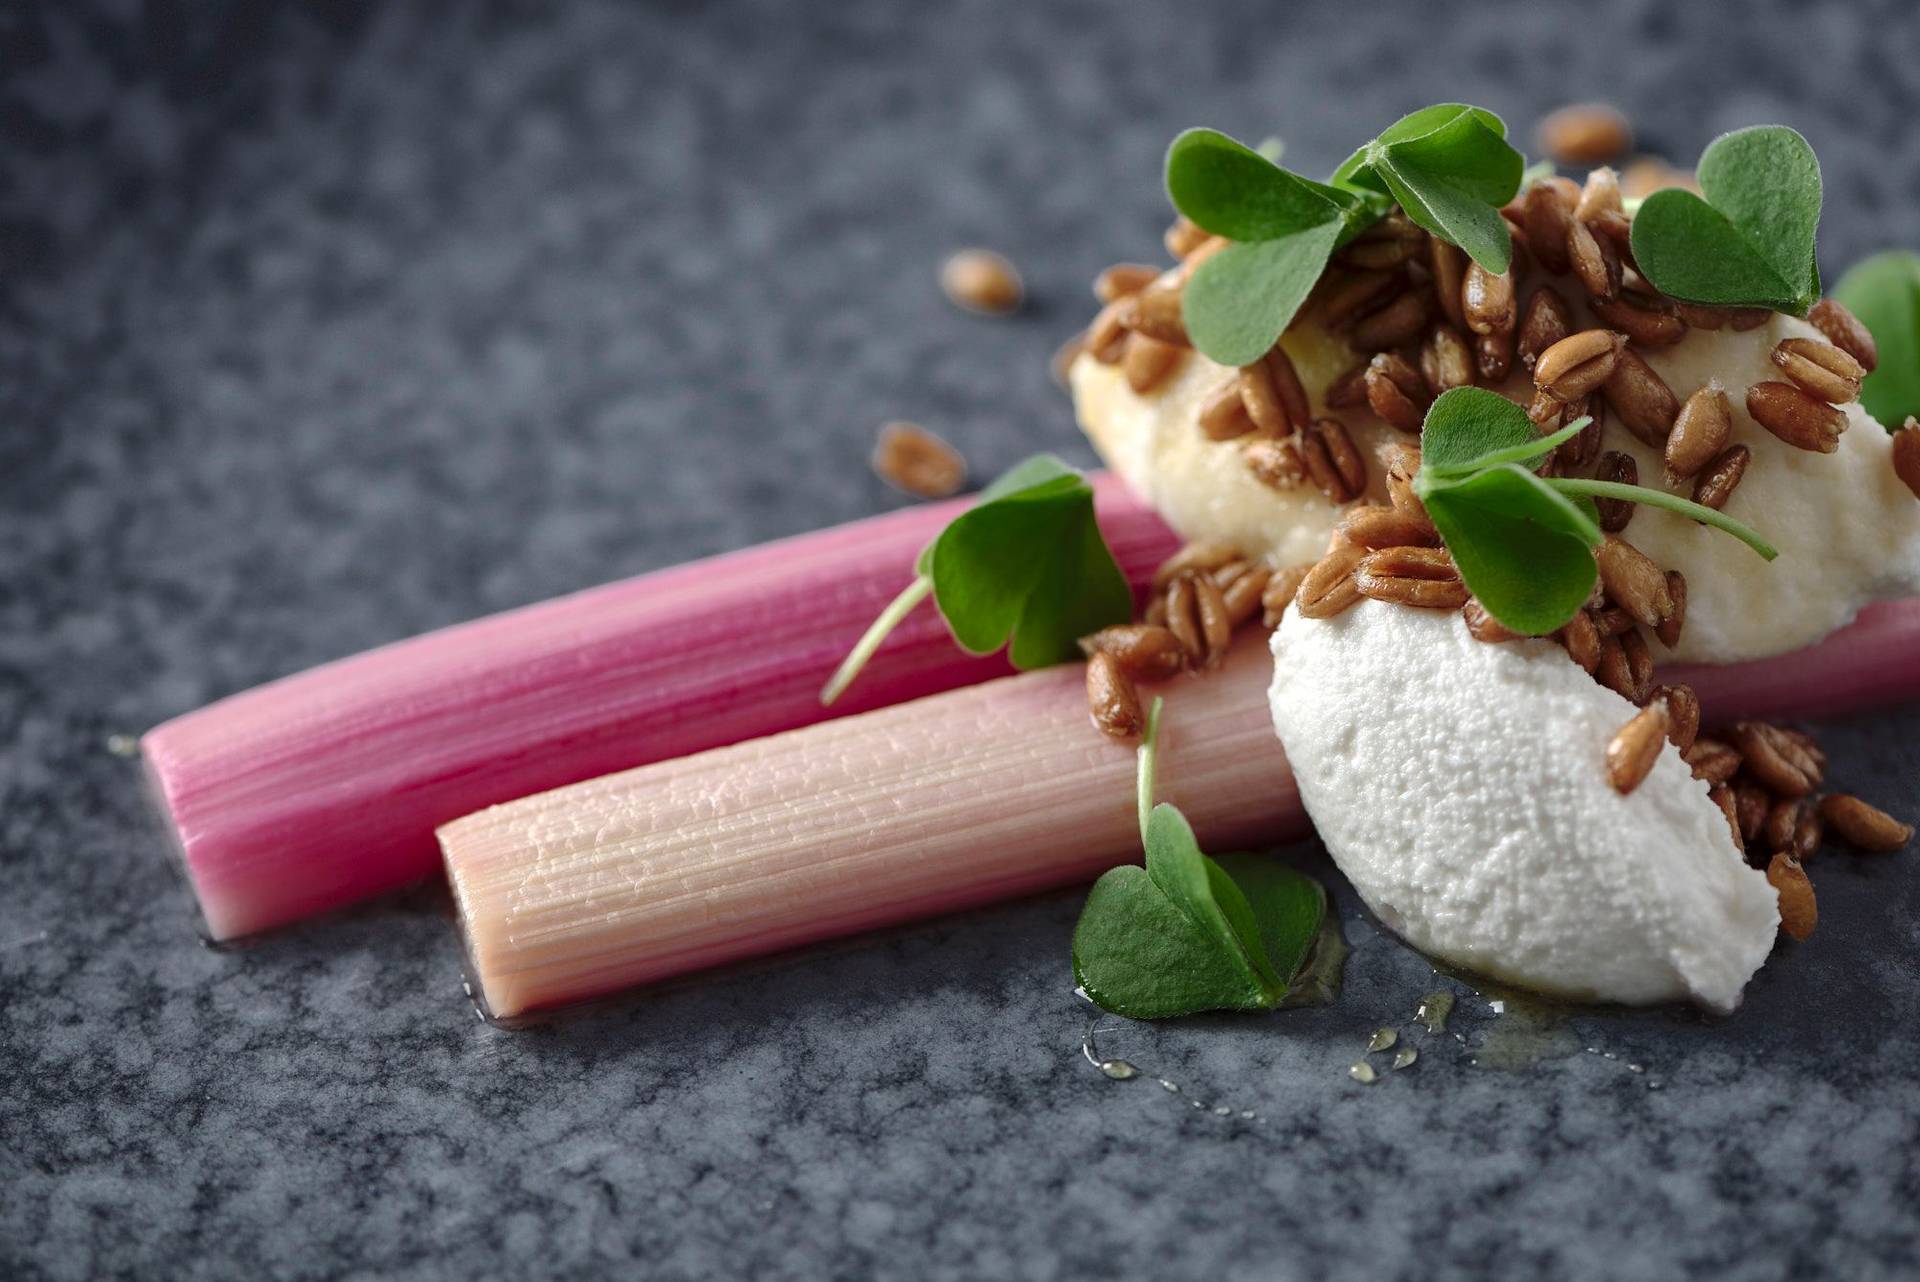 braised rhubarb with vegan ricotta spelt pops and sorrel on a blue plate